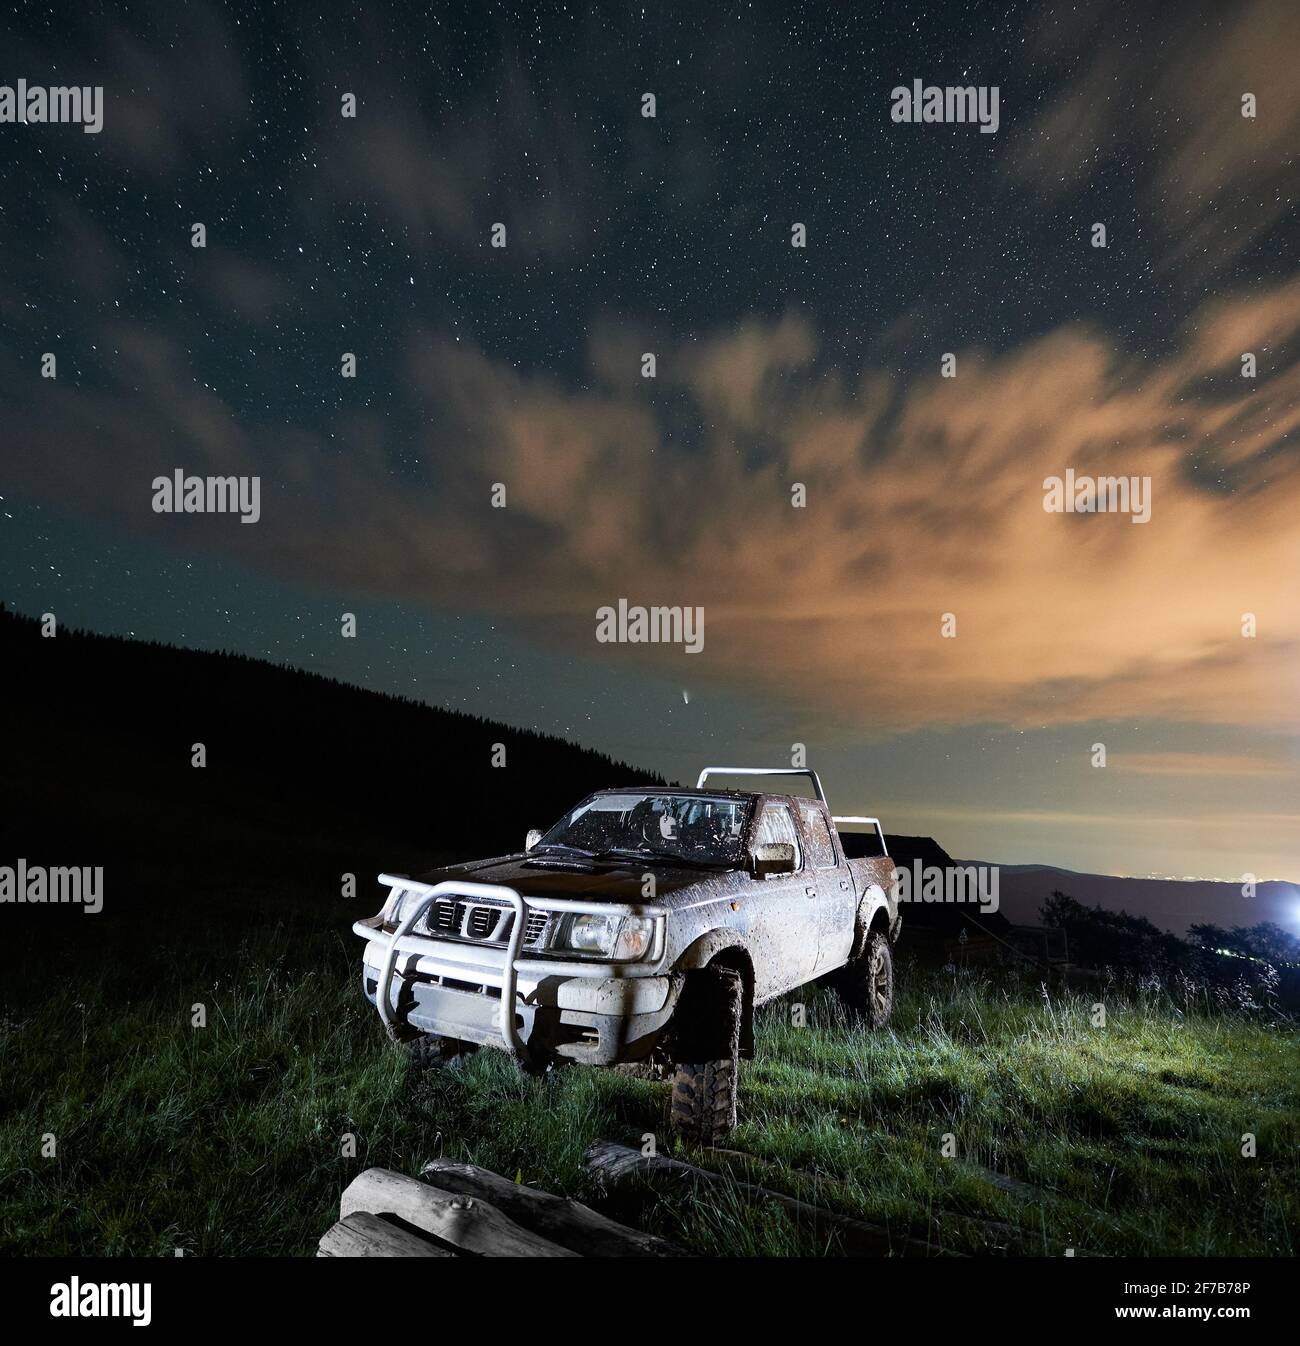 https://c8.alamy.com/comp/2F7B78P/dirty-big-car-in-the-mountains-at-night-concept-of-travelling-resting-on-nature-and-looking-at-starry-sky-with-car-2F7B78P.jpg